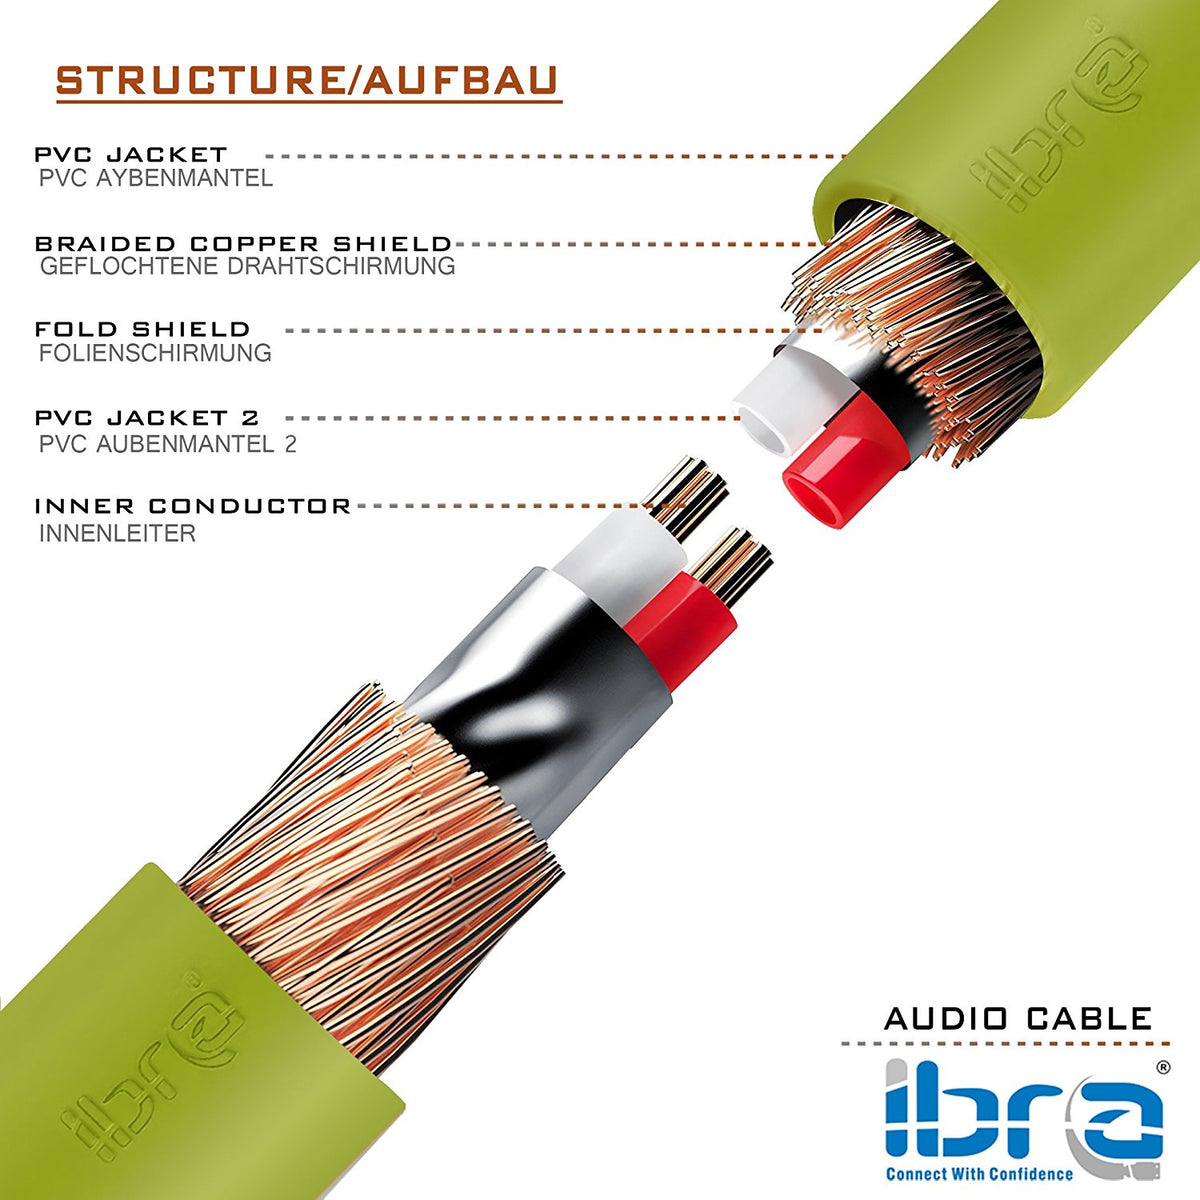 Aux Cable 3M 3.5mm Stereo Pro Auxiliary Audio Cable - for Beats Headphones Apple iPod iPhone iPad Samsung LG Smartphone MP3 Player Home / Car etc - IBRA Green